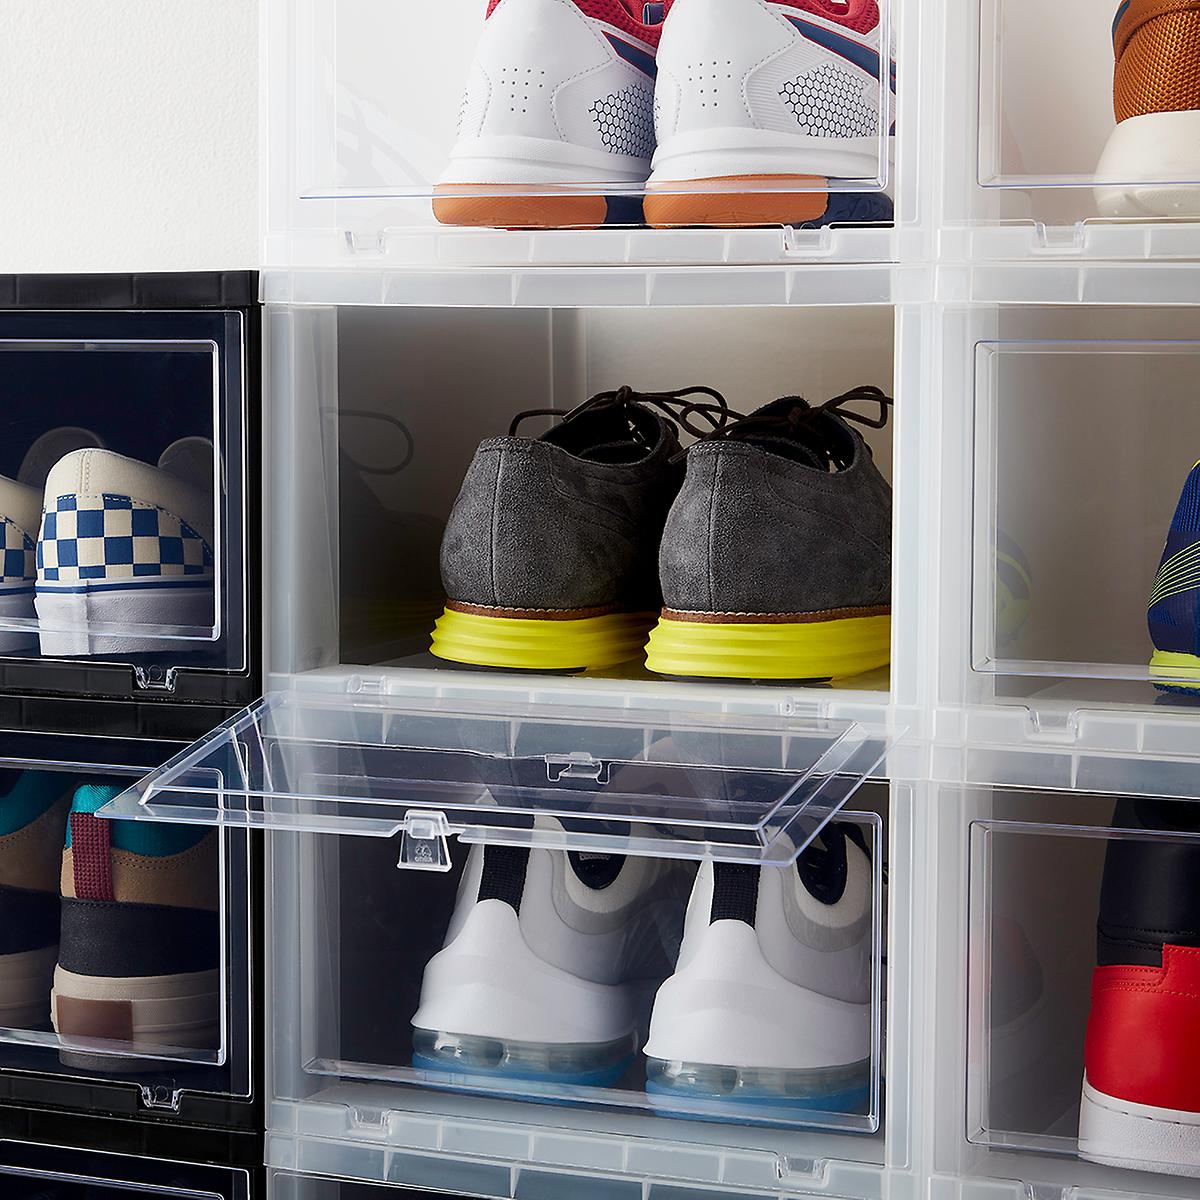 Use Bin for Your Shoes Collection